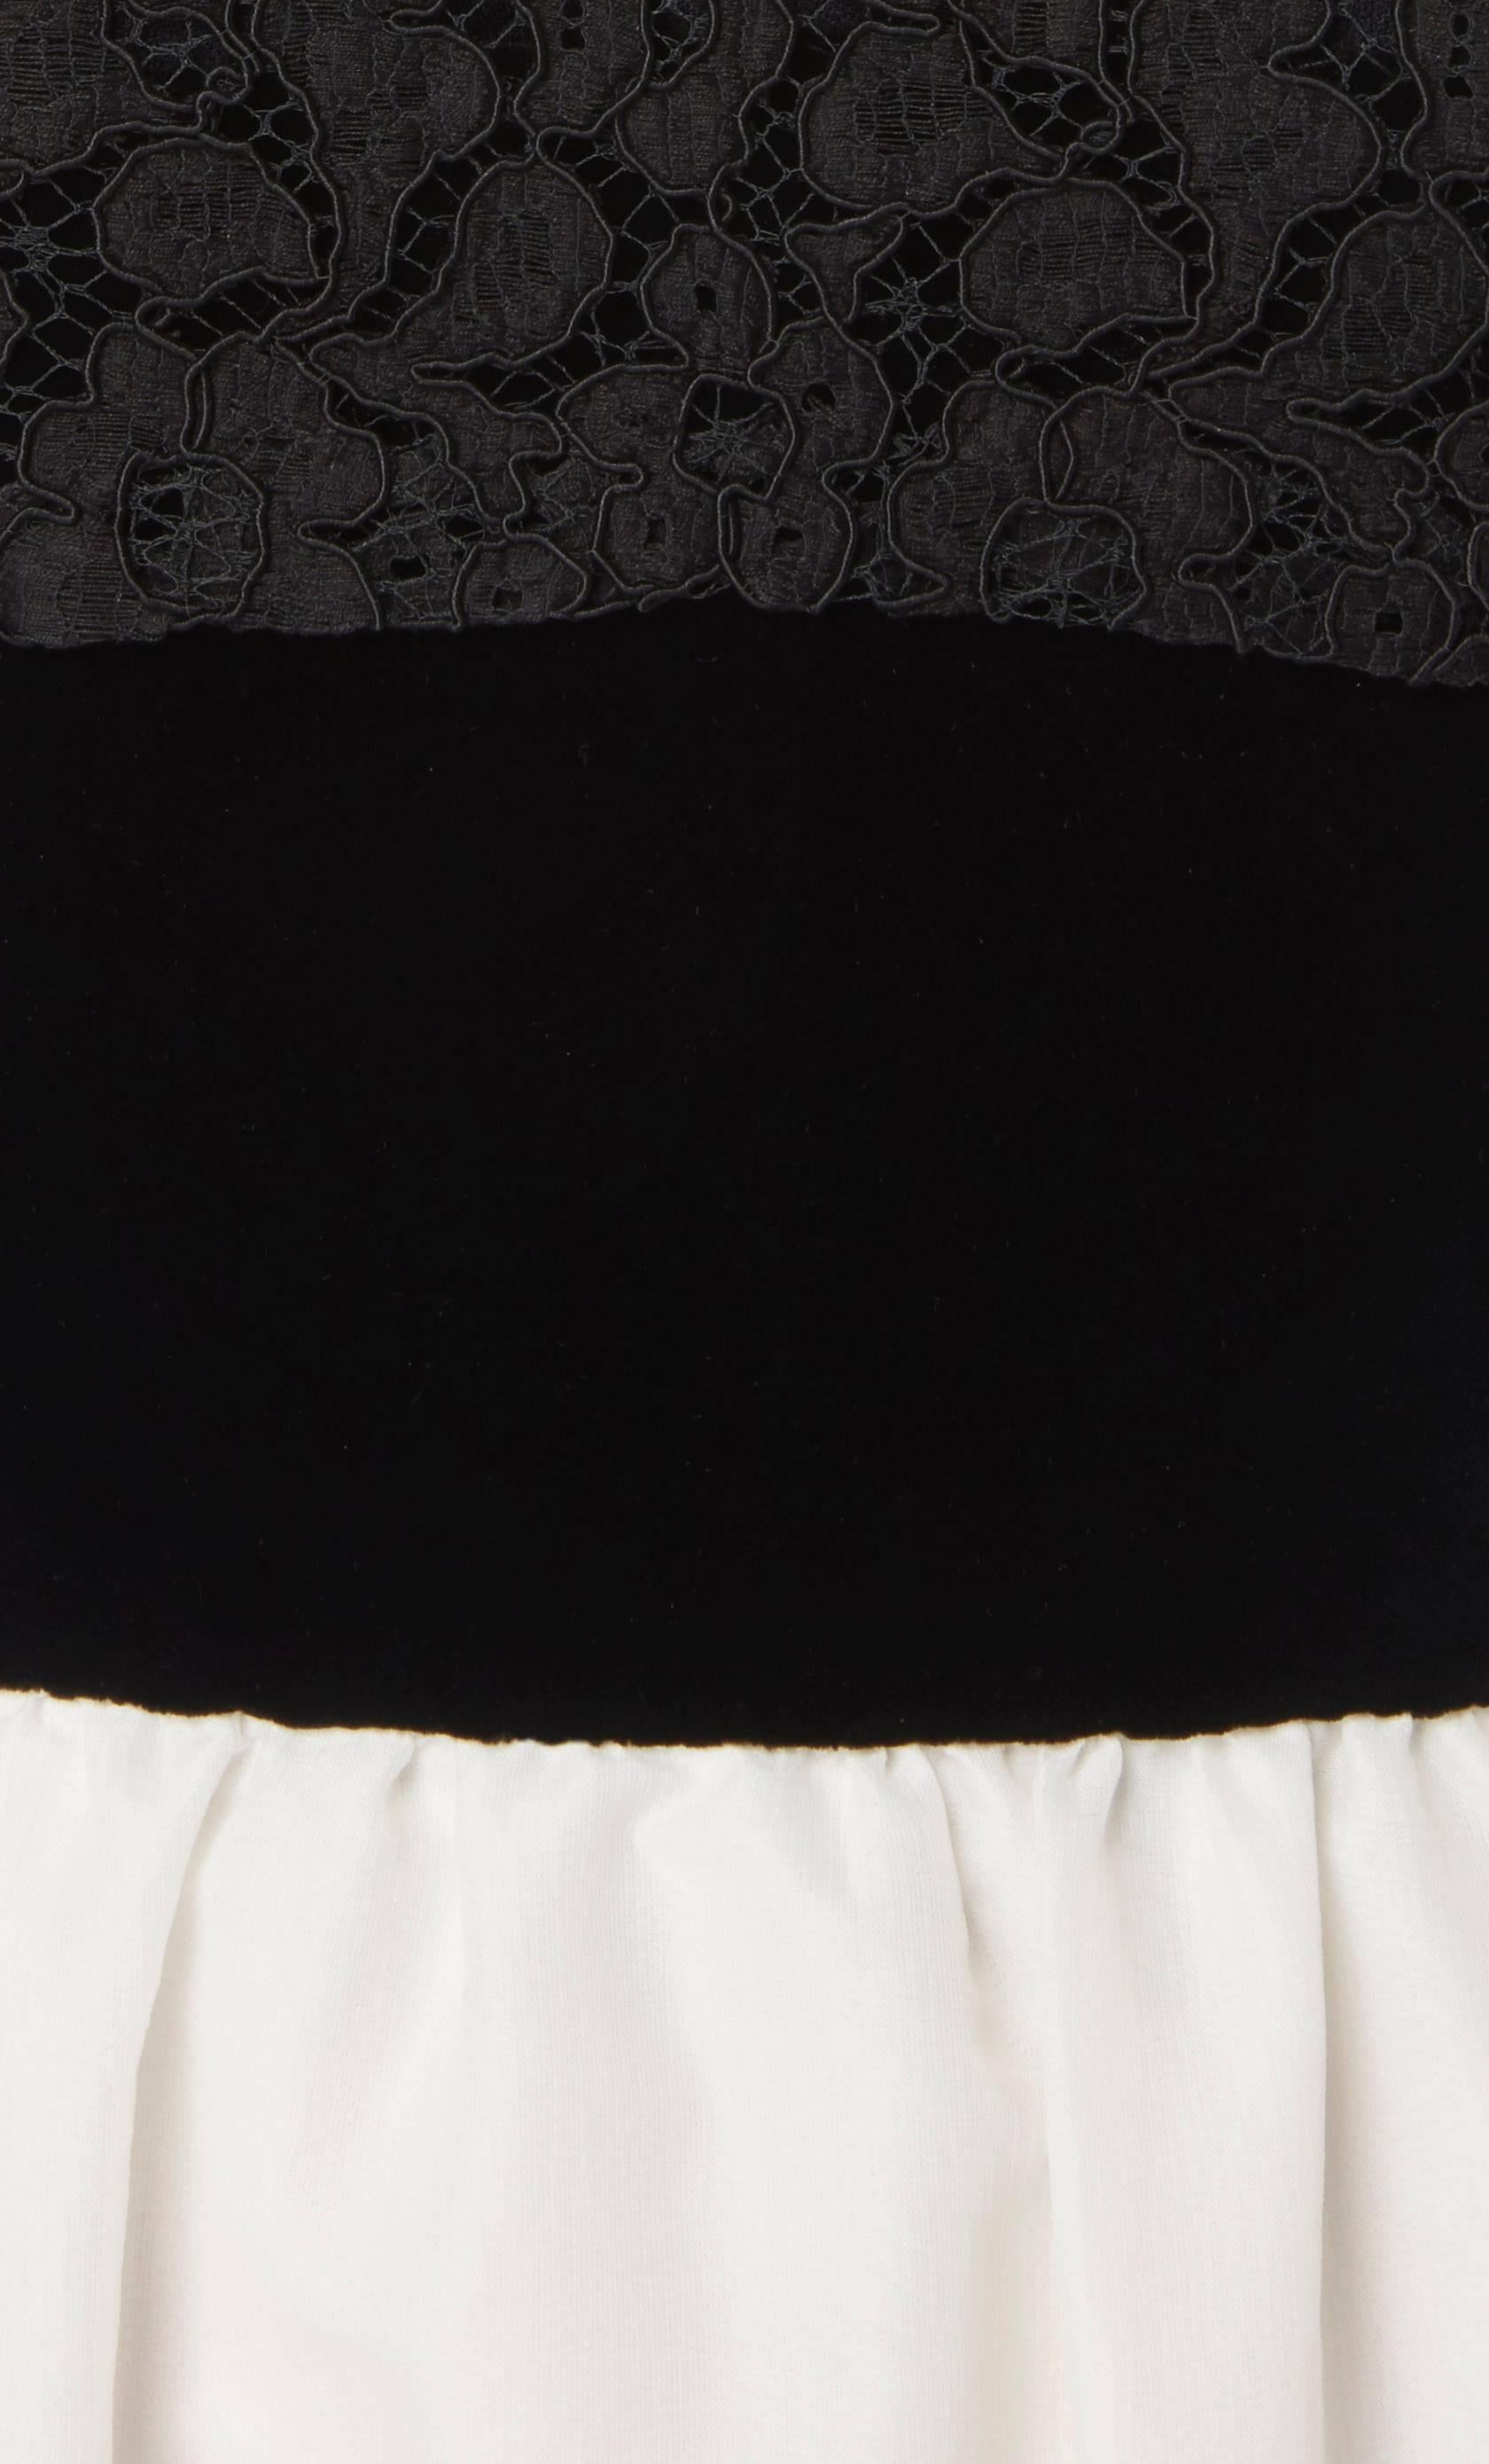 Jacques Heim haute couture black & white dress, circa 1960 In Excellent Condition For Sale In London, GB